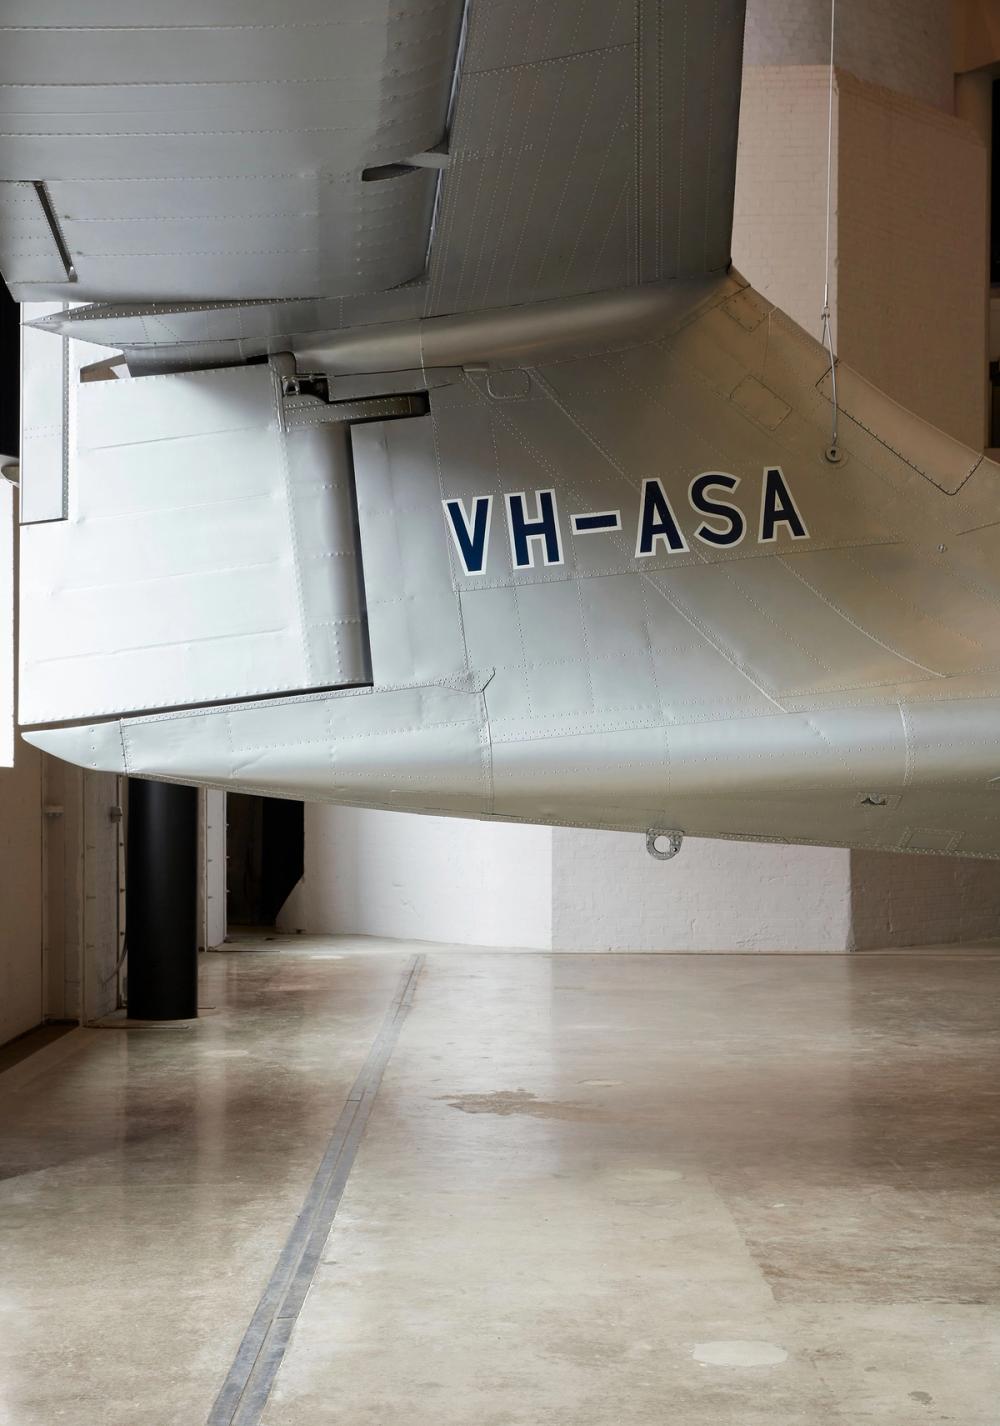 Registration code text ‘VH-ASA’ on the tail of silver plane.